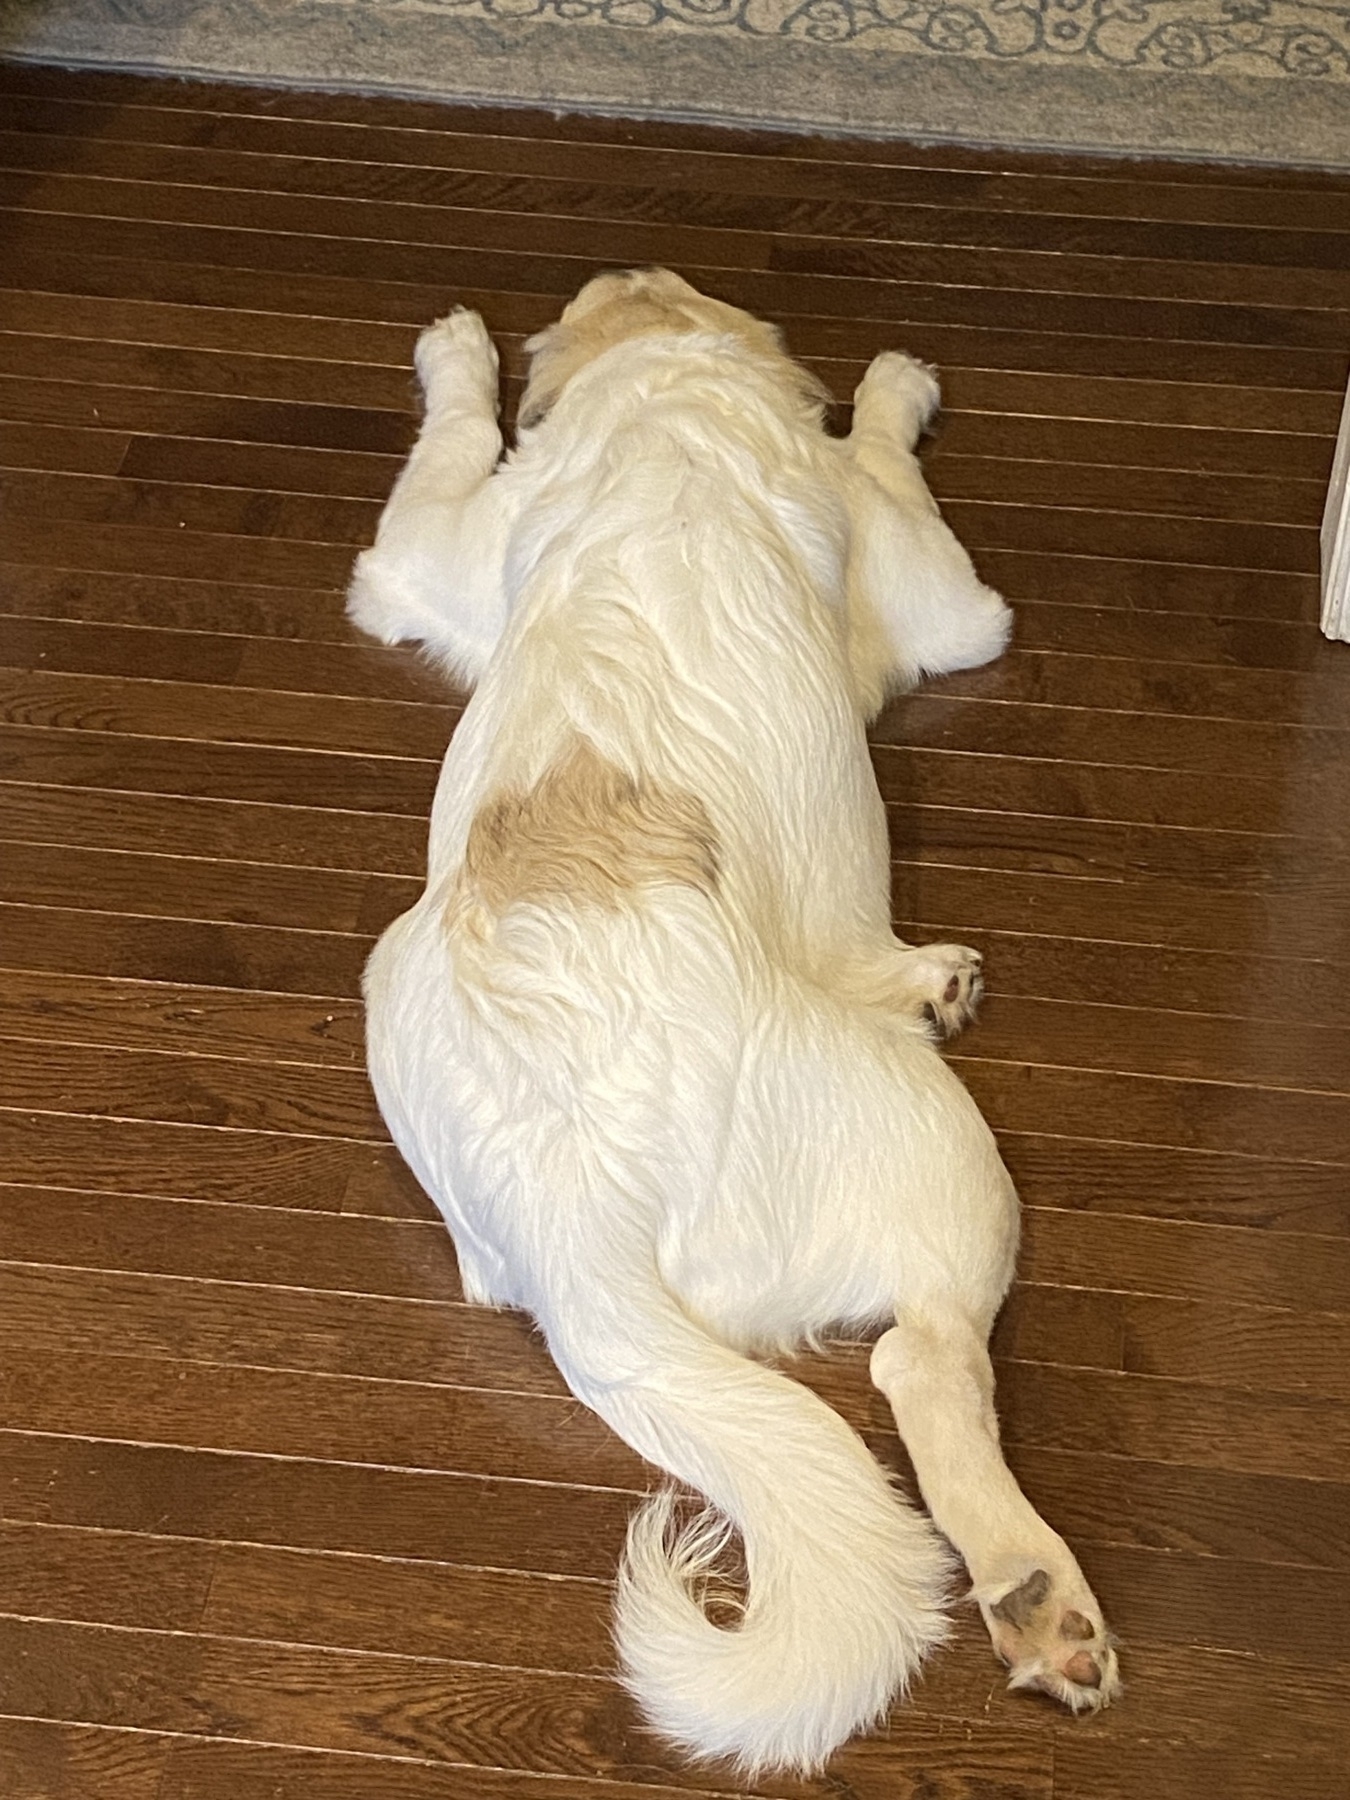 Picture of a Great Pyrenees puppy, name Gracie, laying on the kitchen floor.